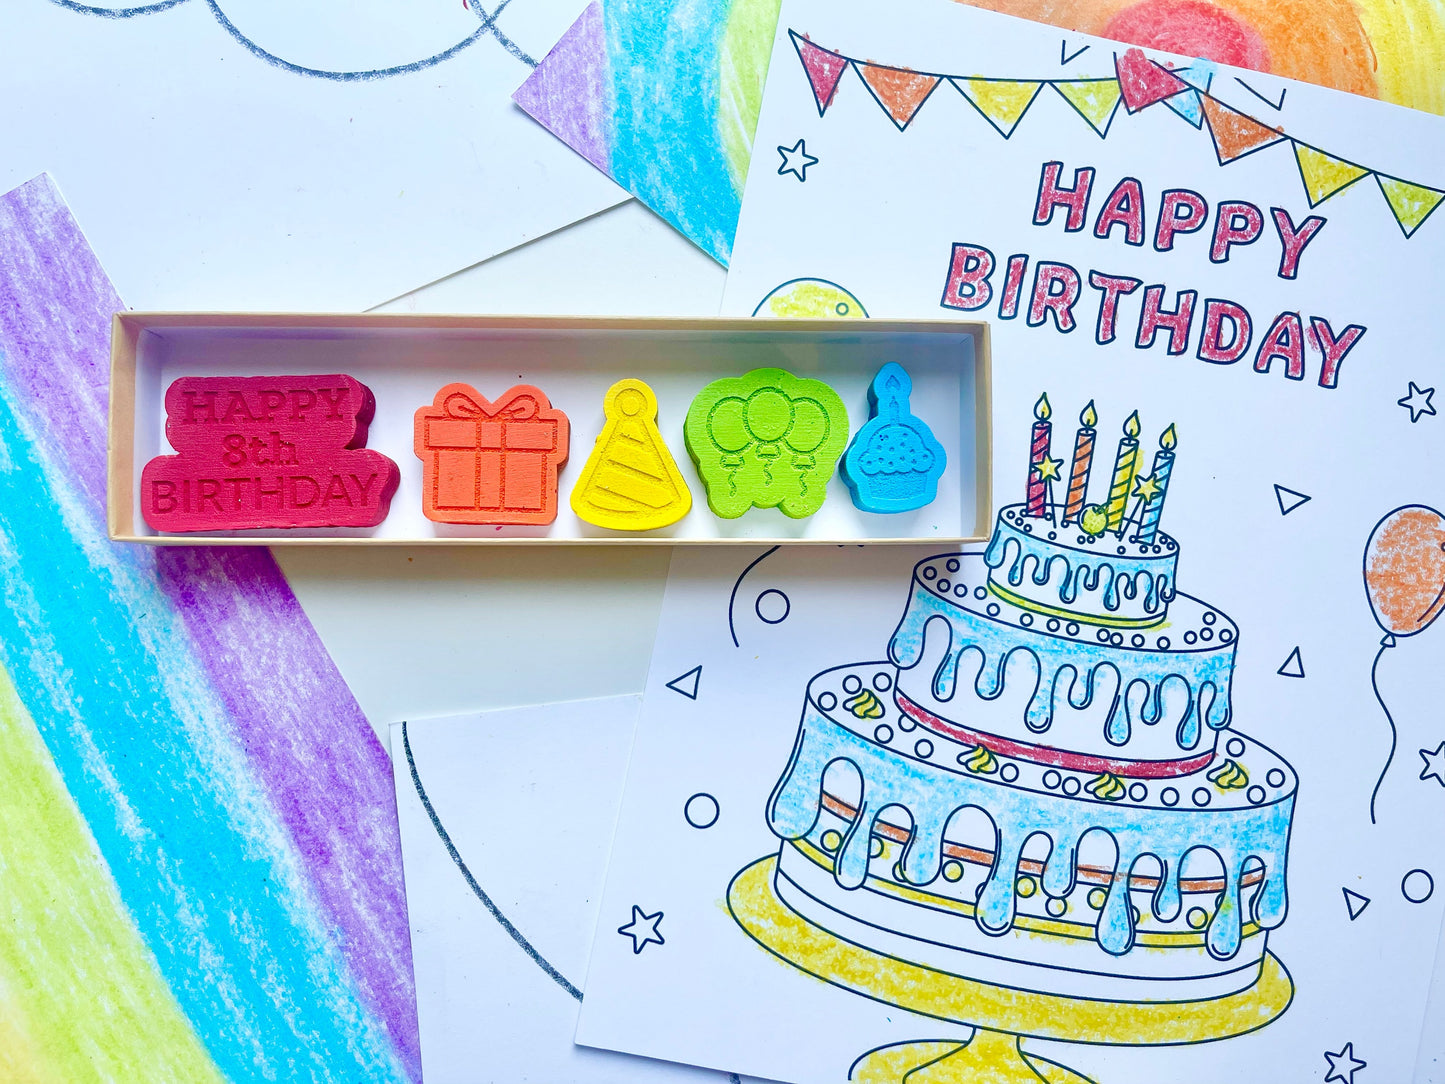 8th Birthday Crayons - 8th Birthday Gifts - Kids Happy Birthday Gifts - Kids Birthday Presents - Gifts For Kids - 8th Birthday Party Favors